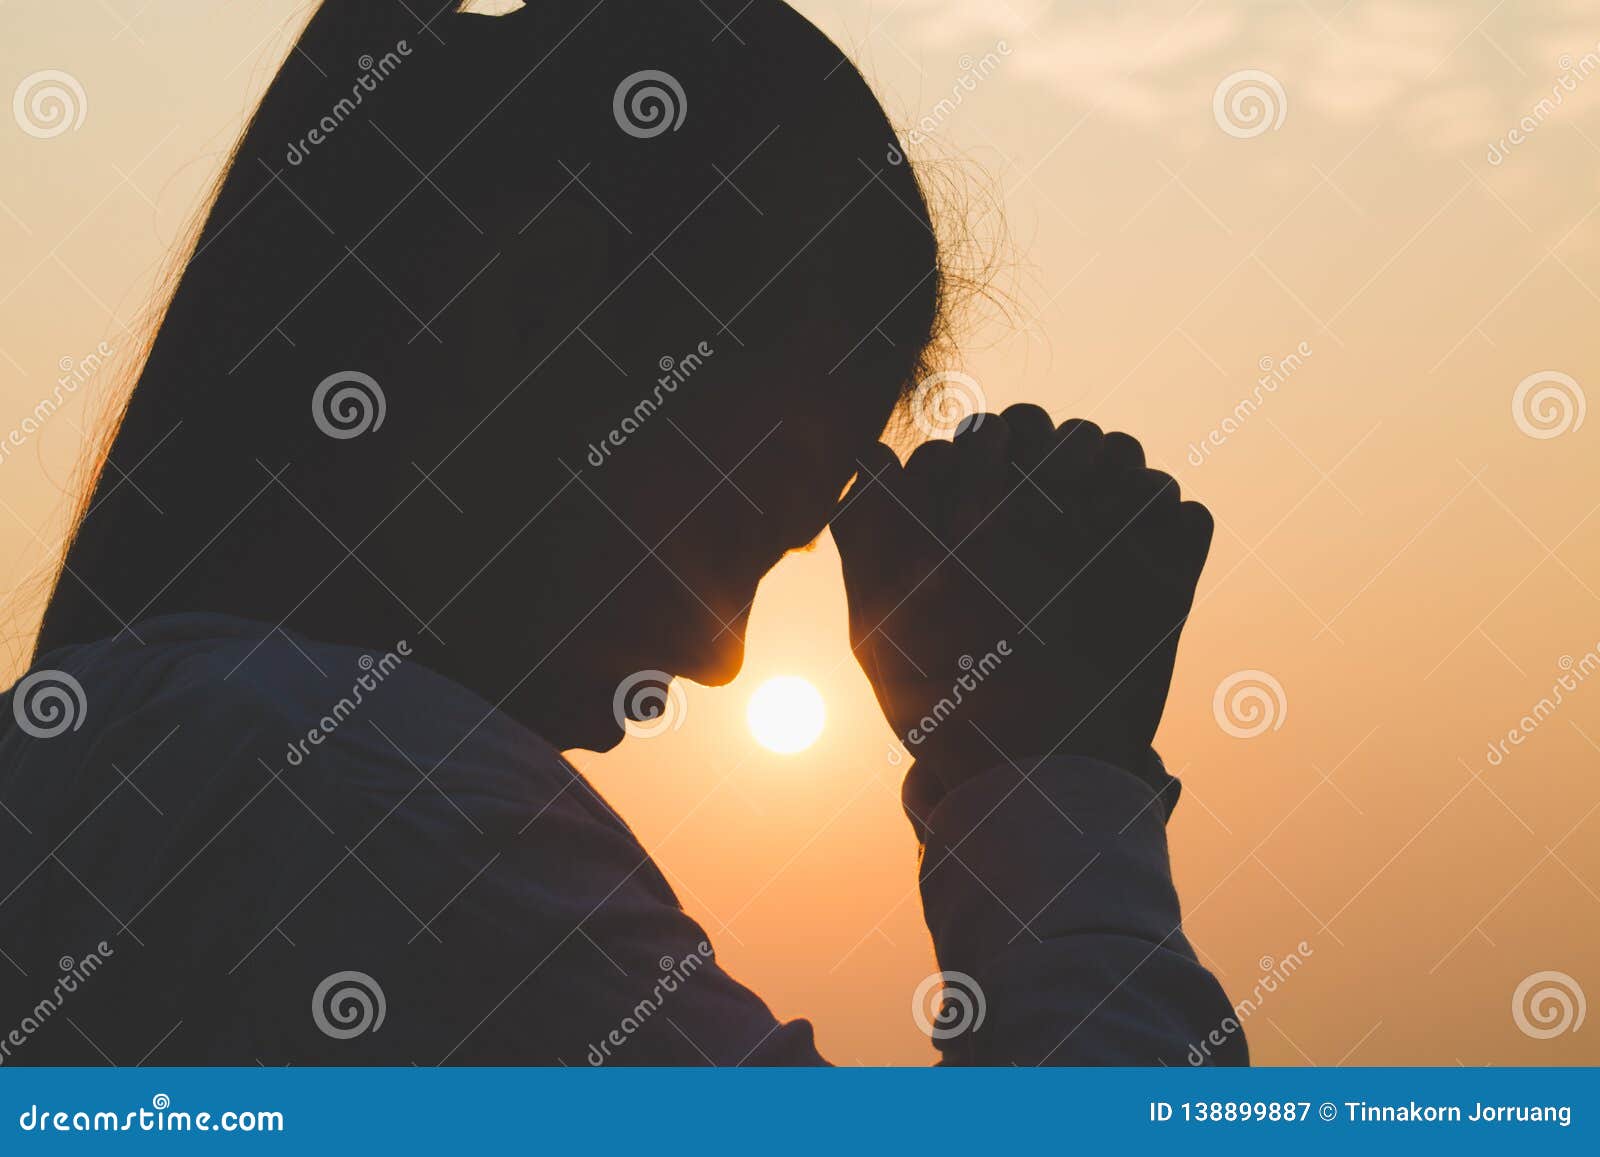 young woman praying in the morning, hands folded in prayer concept for faith, spirituality and religion